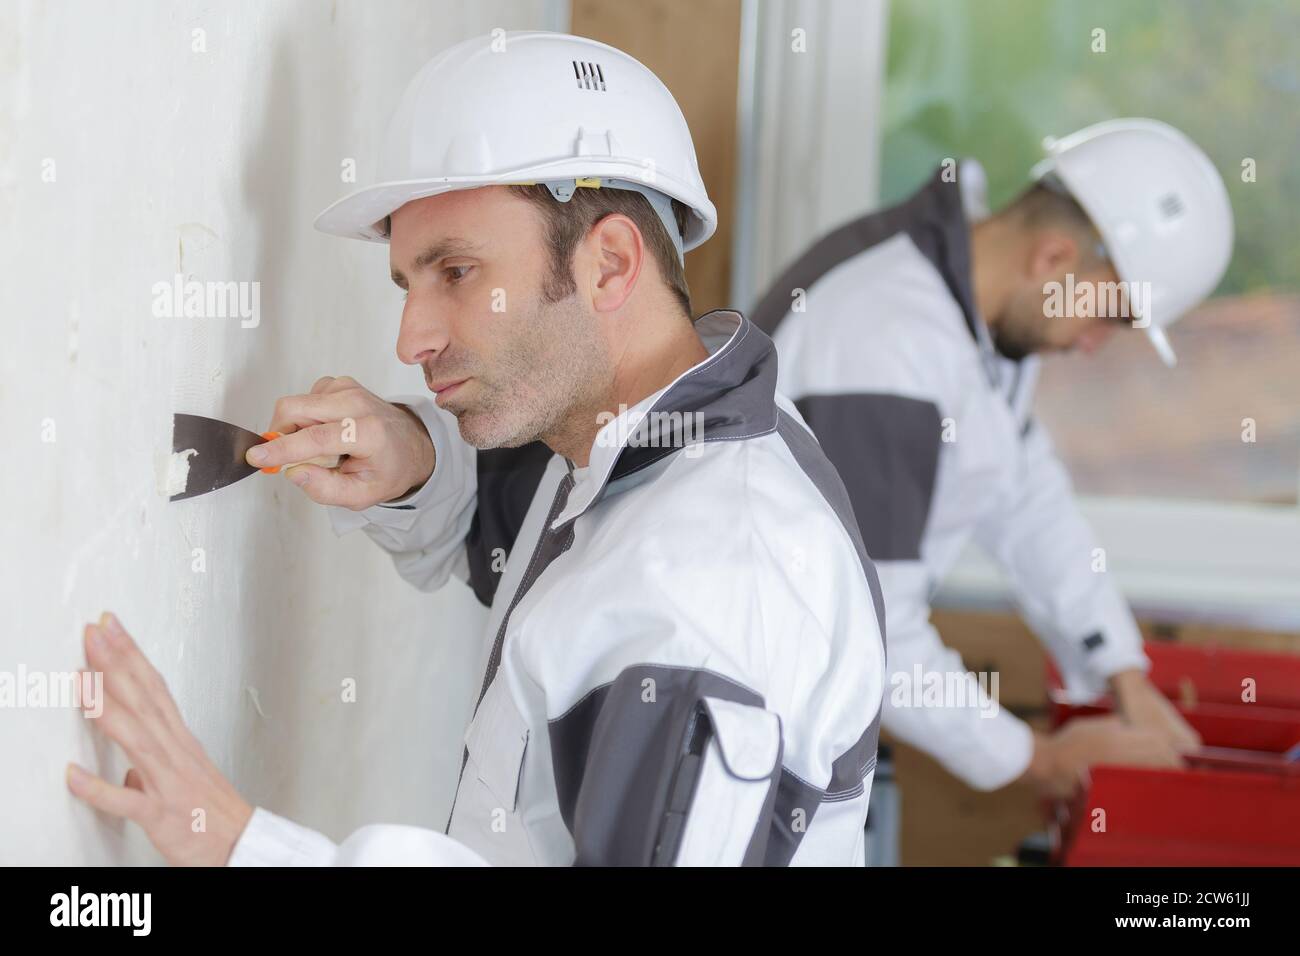 portrait of worker scraping the wall Stock Photo